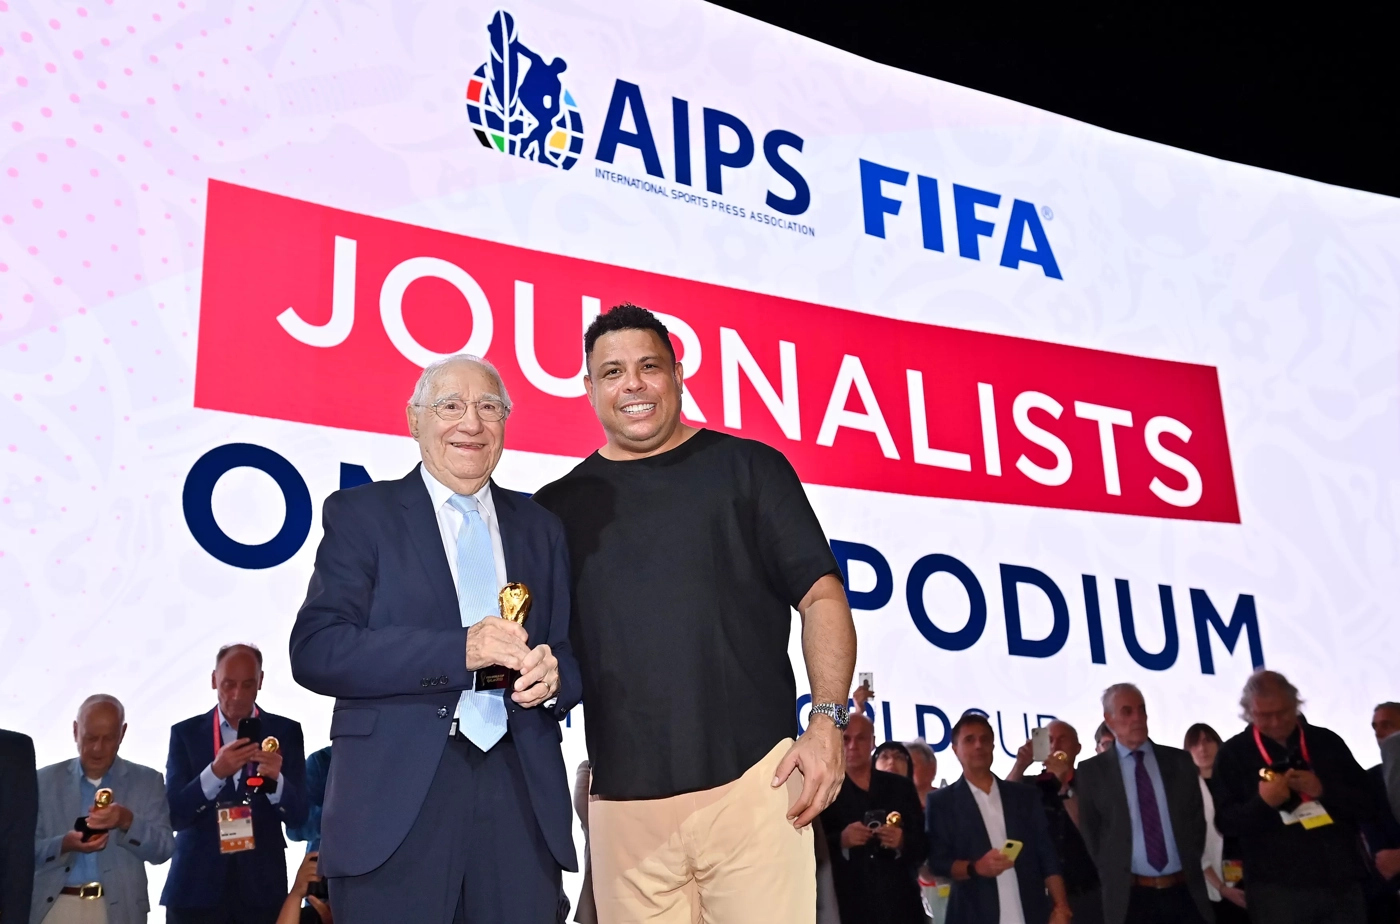 Meet the journalist who has covered 17 FIFA World Cups in a row